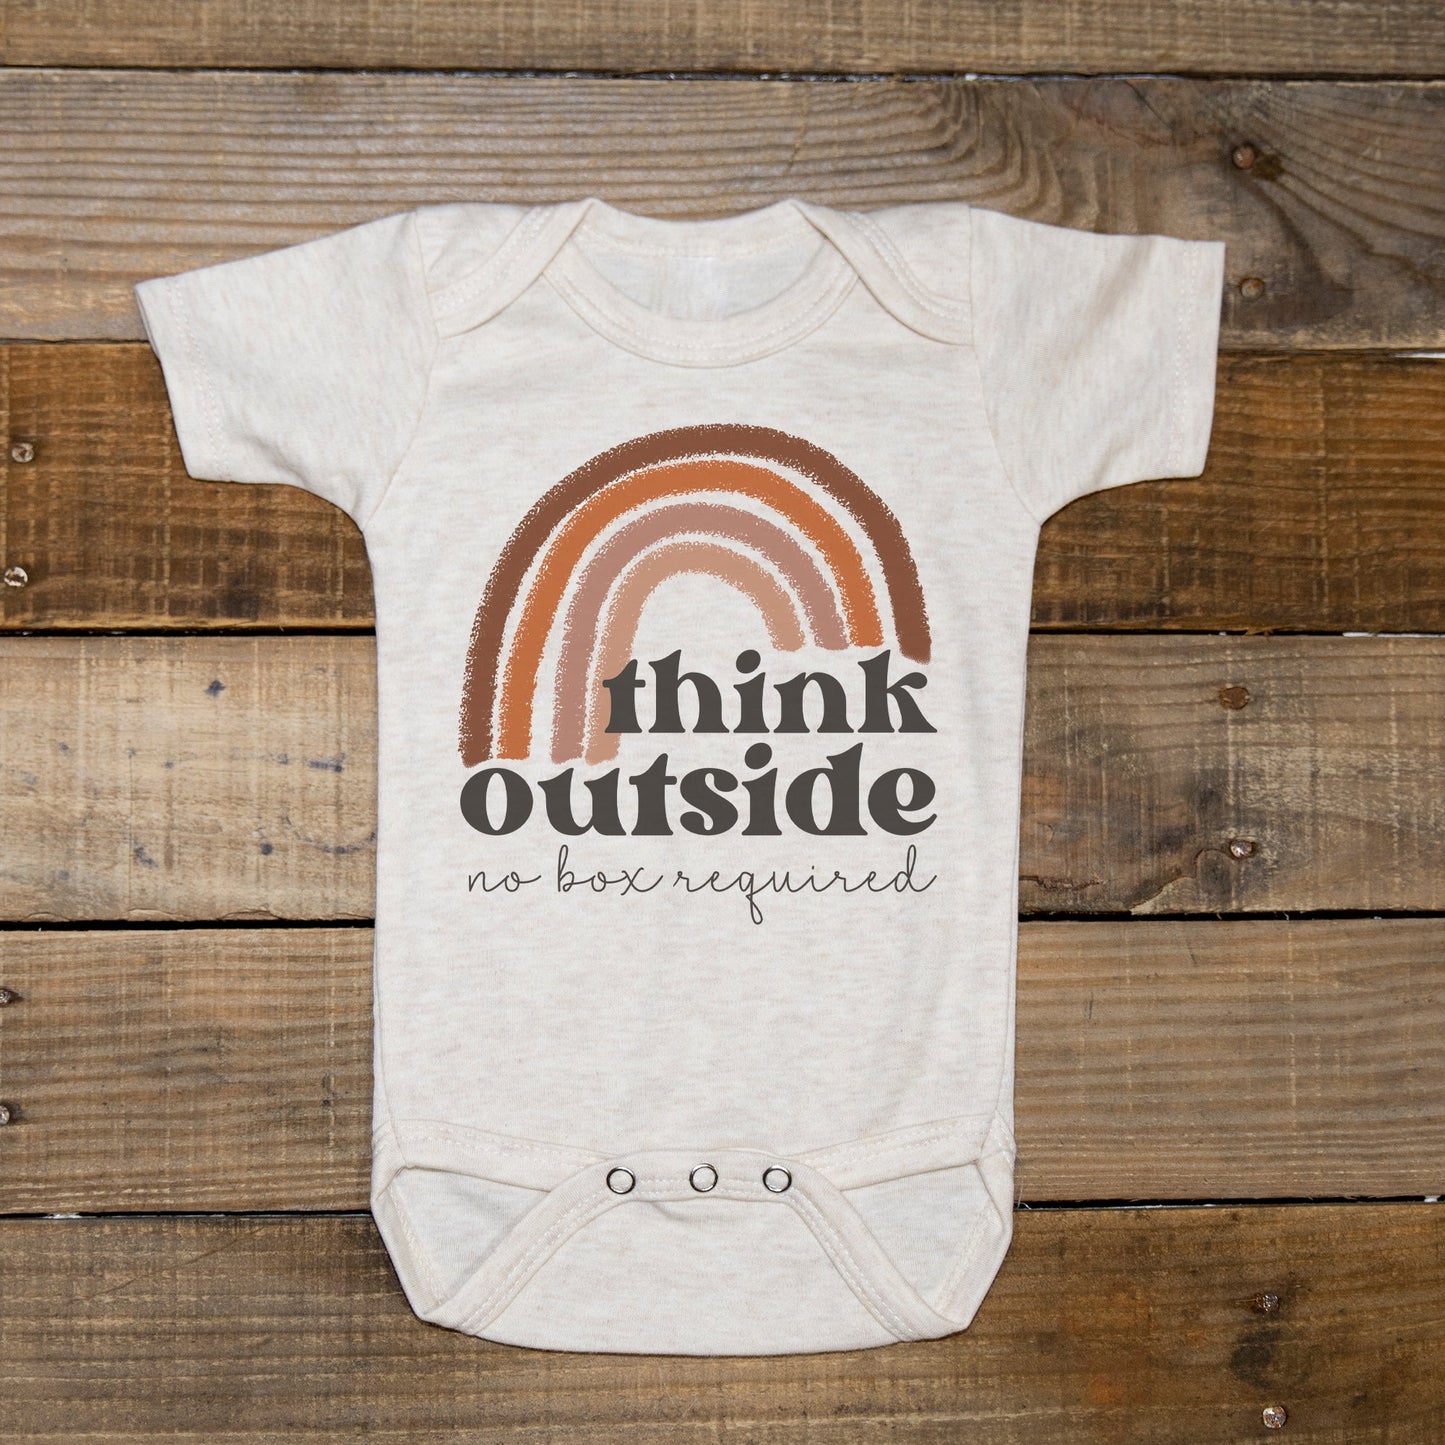 "Think outside no box required" Neutral Rainbow body suit